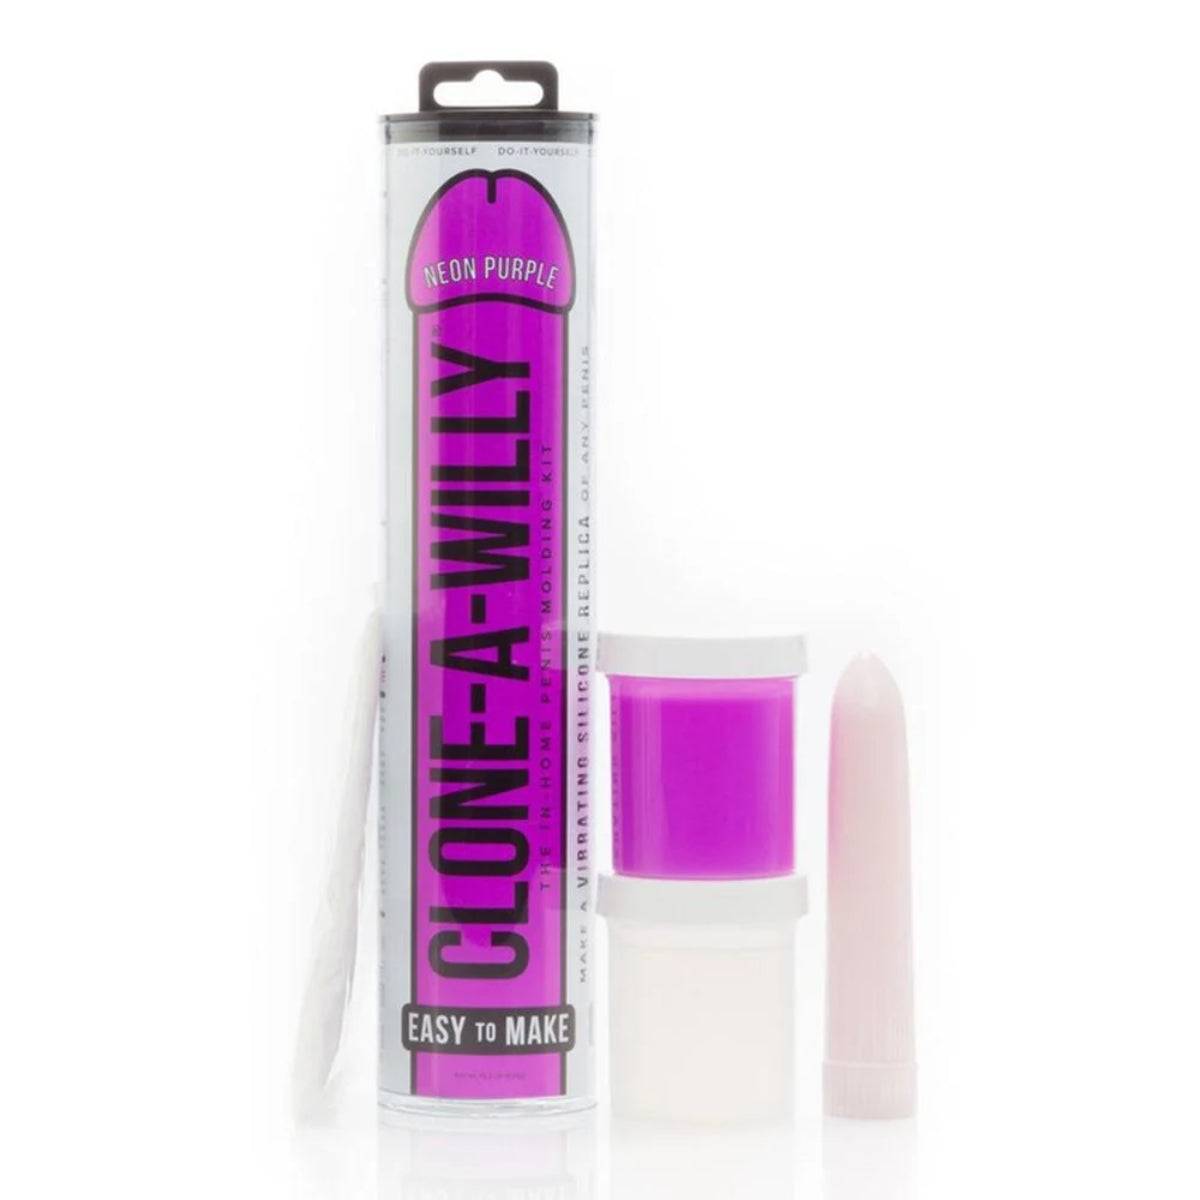 Clone A Willy Penis Moulding Kit Neon Purple - Simply Pleasure